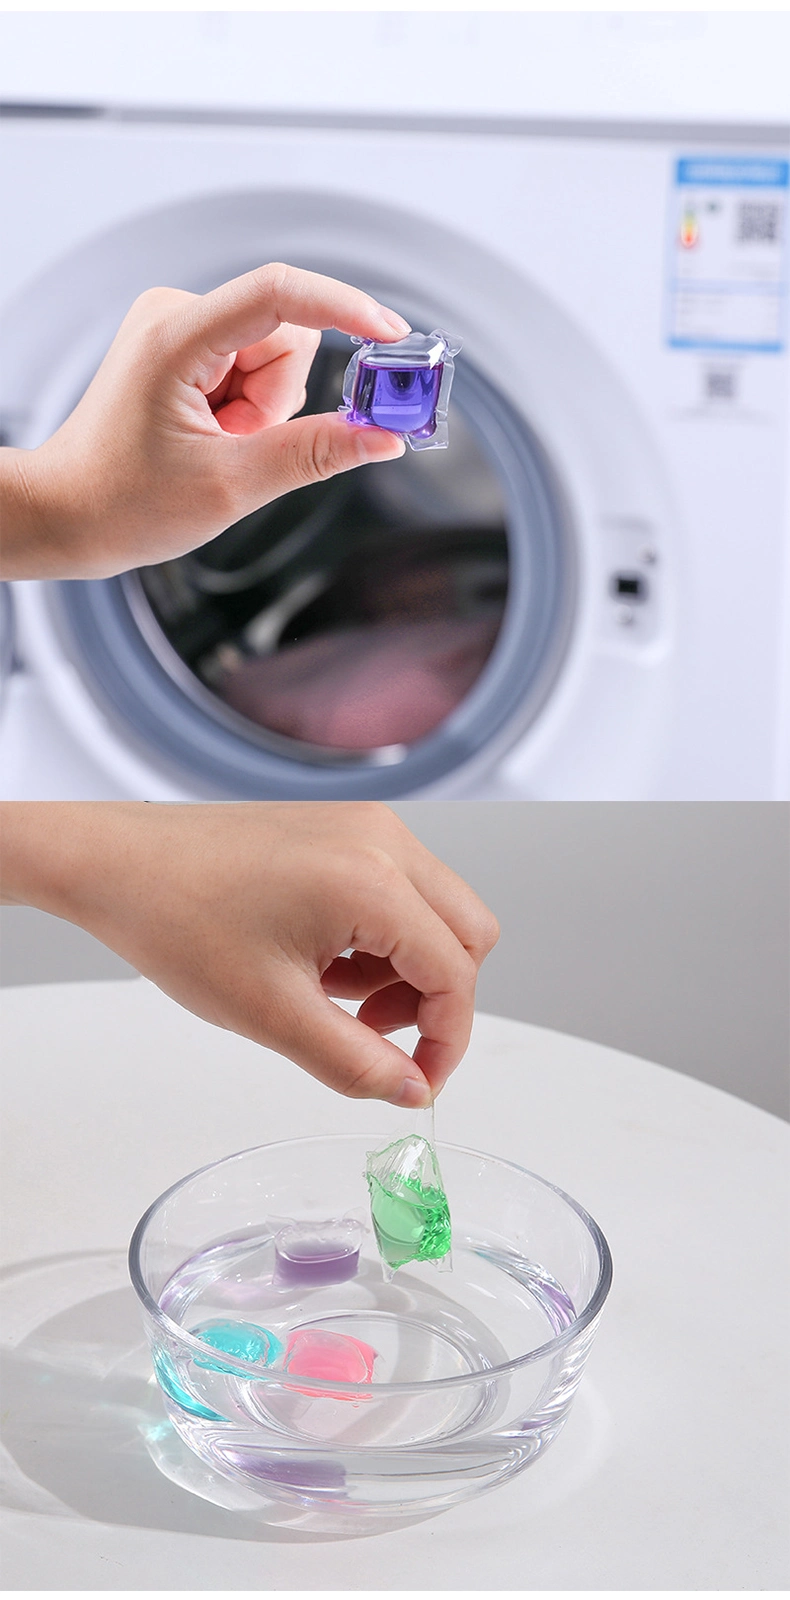 Eco-Friendly Biodegradable Laundry Beads Gel 20g Detergent Pods Laundry Capsules